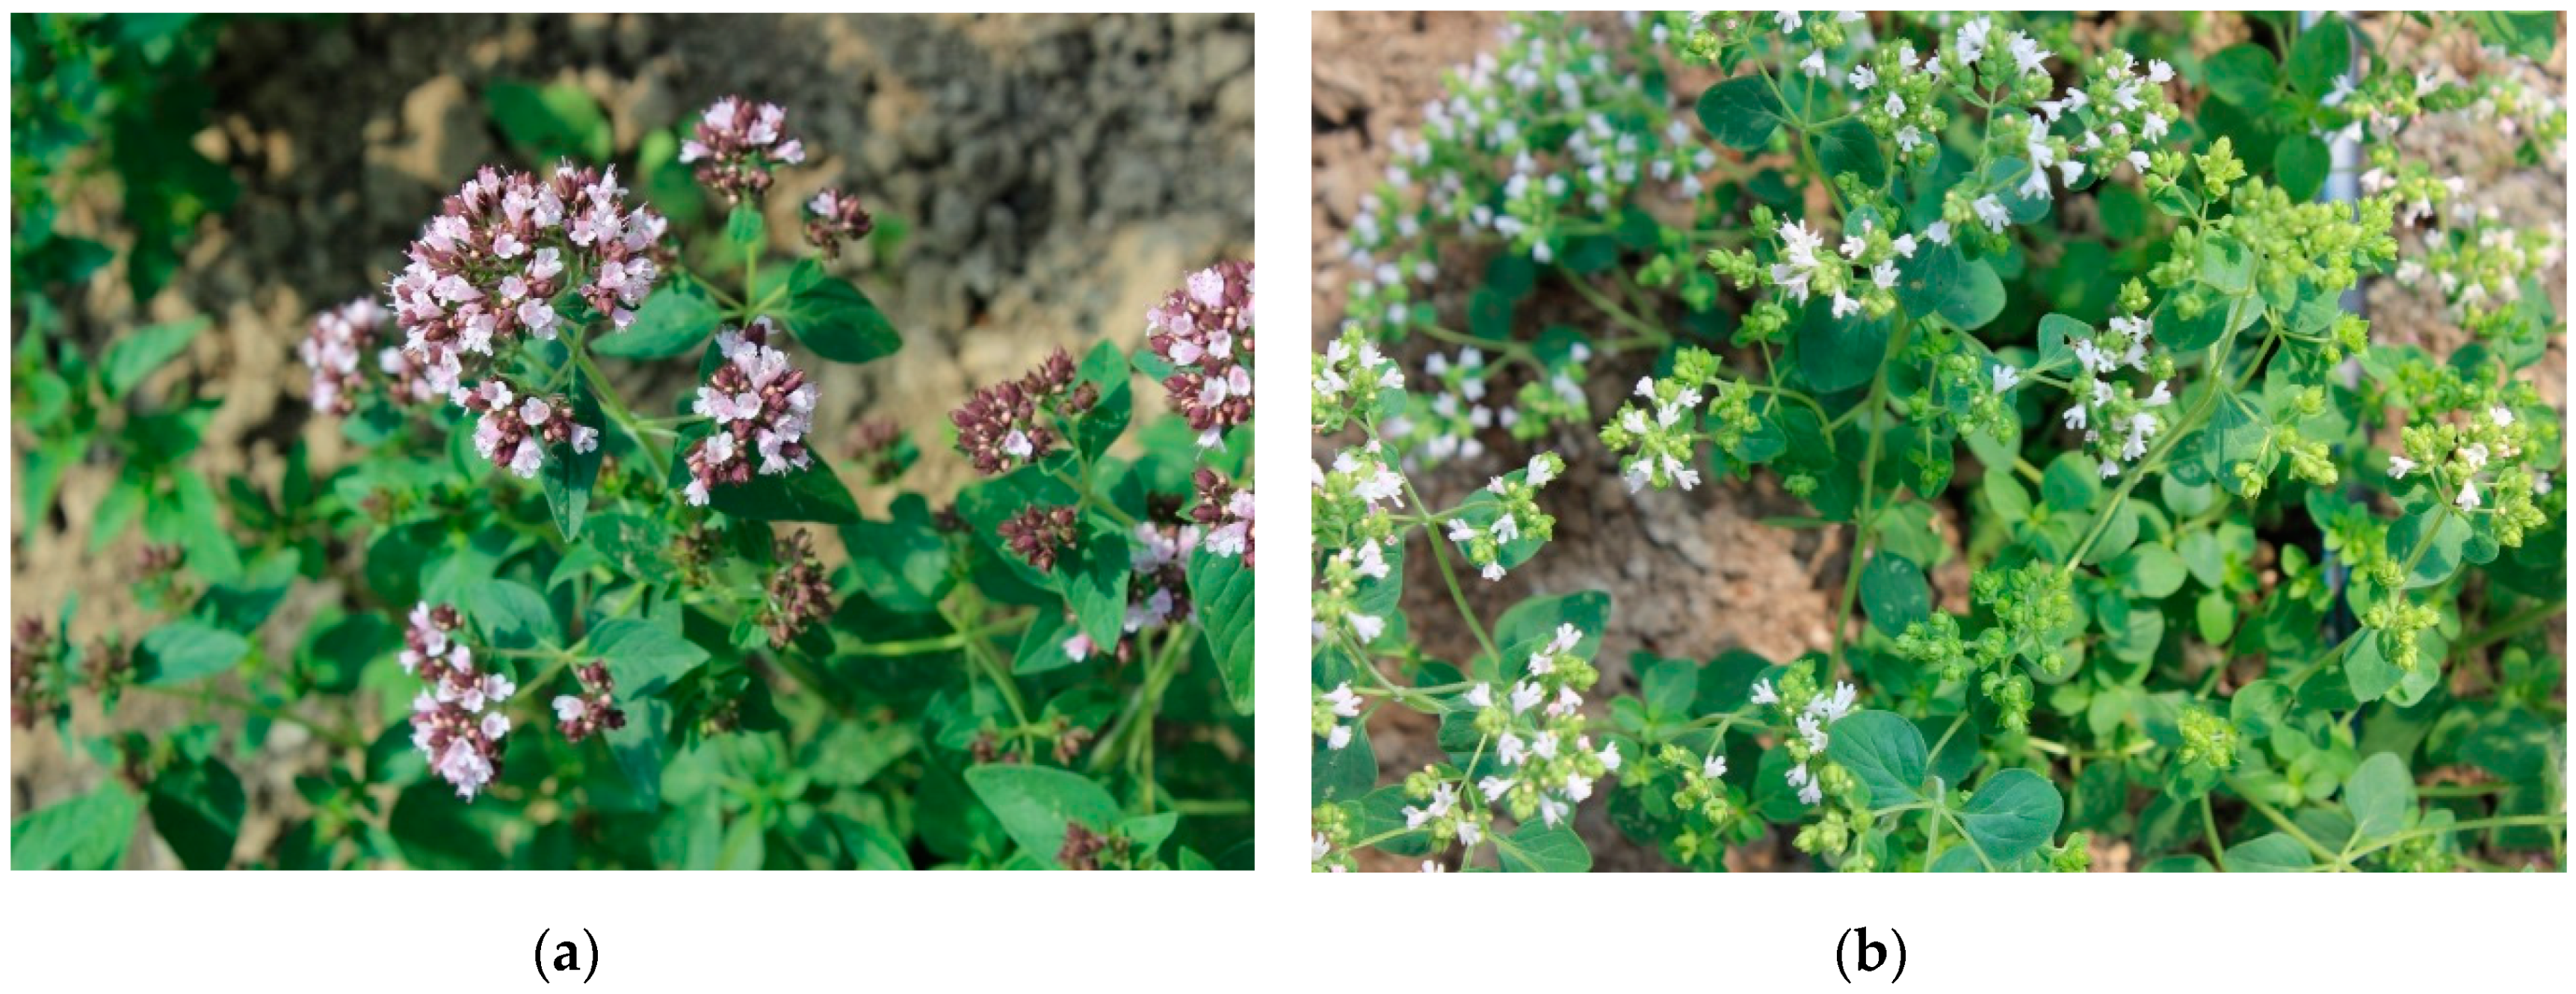 Foods | Free Full-Text | The Quality of Greek Oregano (O. vulgare L. subsp.  hirtum (Link) Ietswaart) and Common Oregano (O. vulgare L. subsp. vulgare)  Cultivated in the Temperate Climate of Central